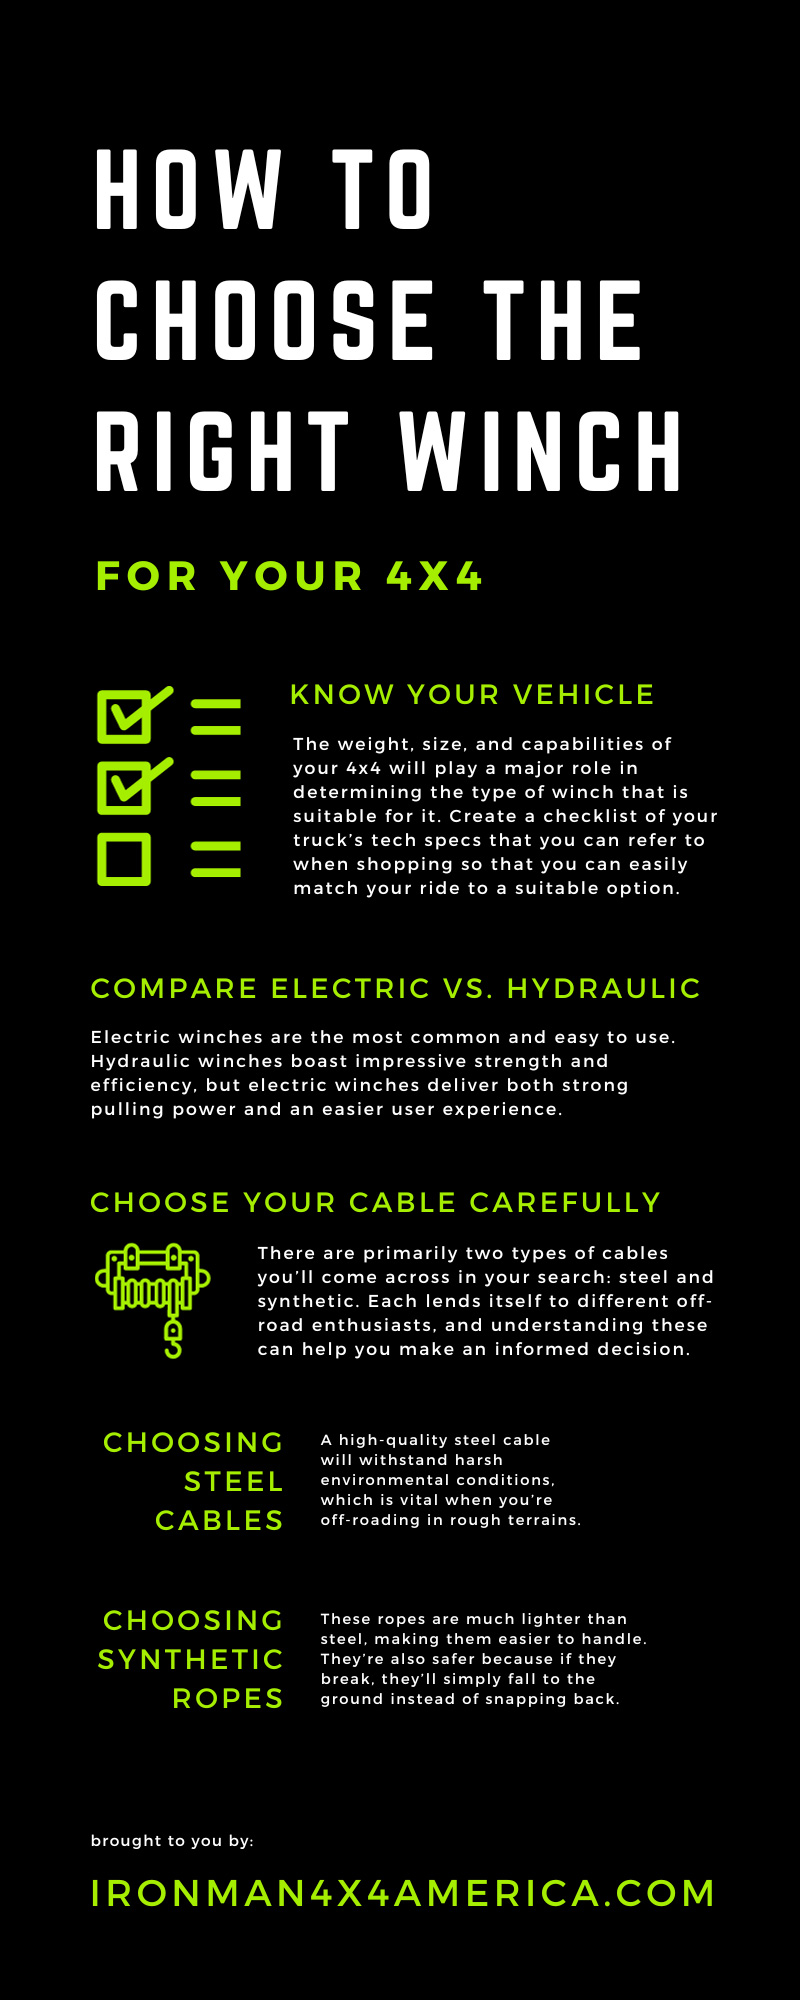 How To Choose the Right Winch for Your 4x4